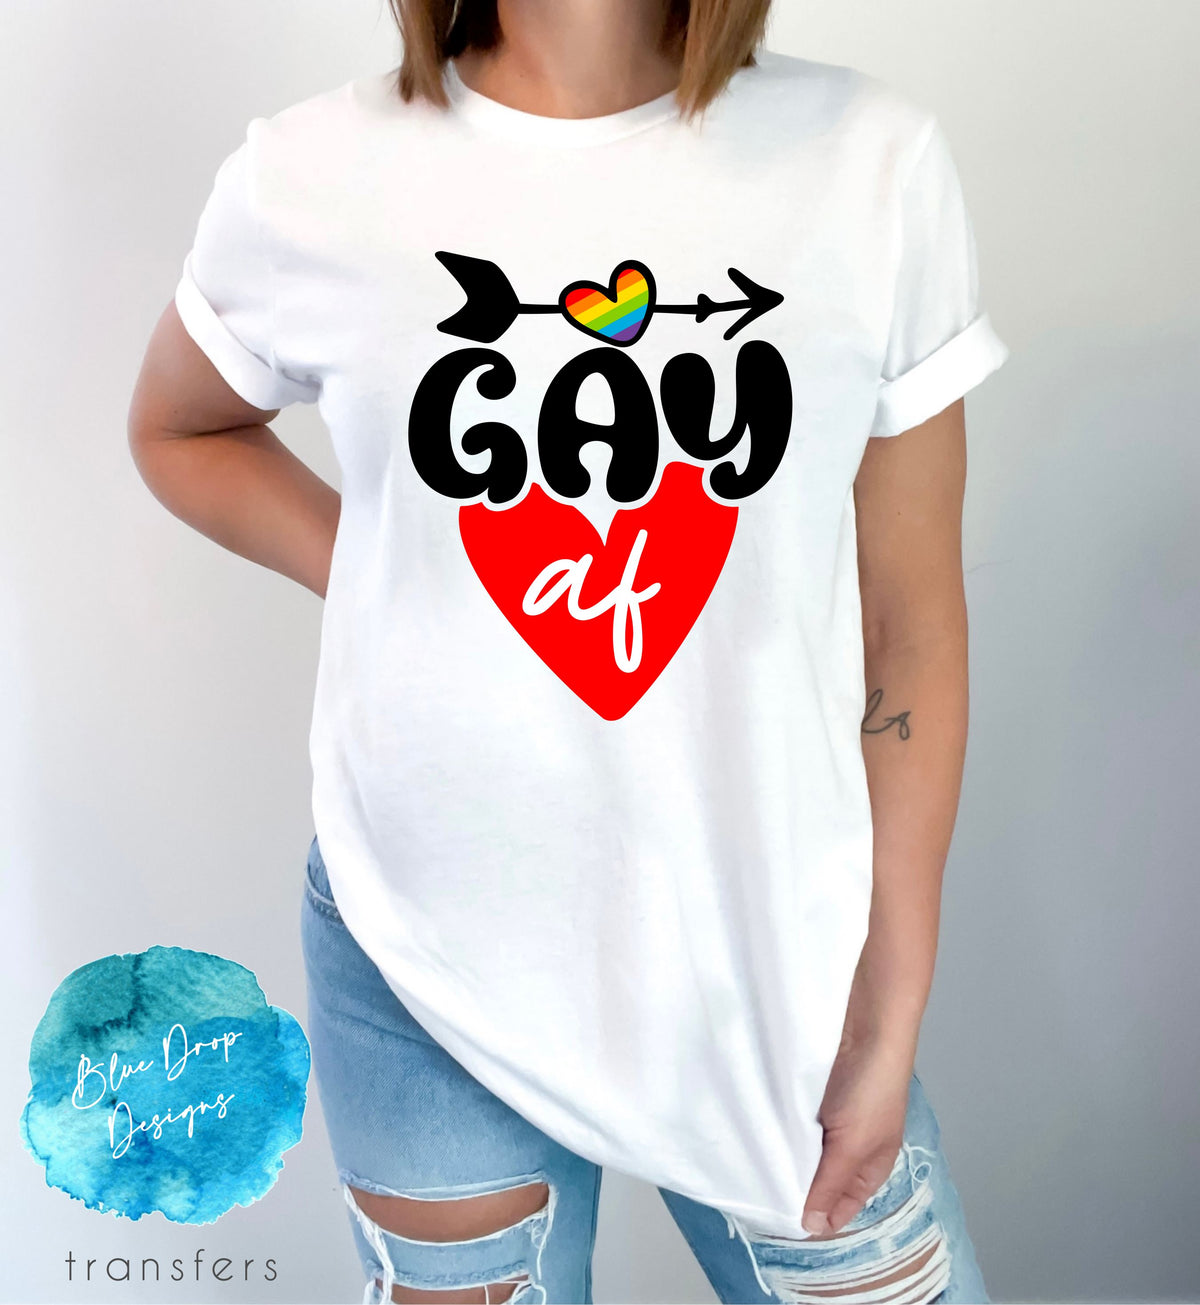 Gay AF Full Colour Transfer Direct to Film Colour Transfer Blue Drop Designs 